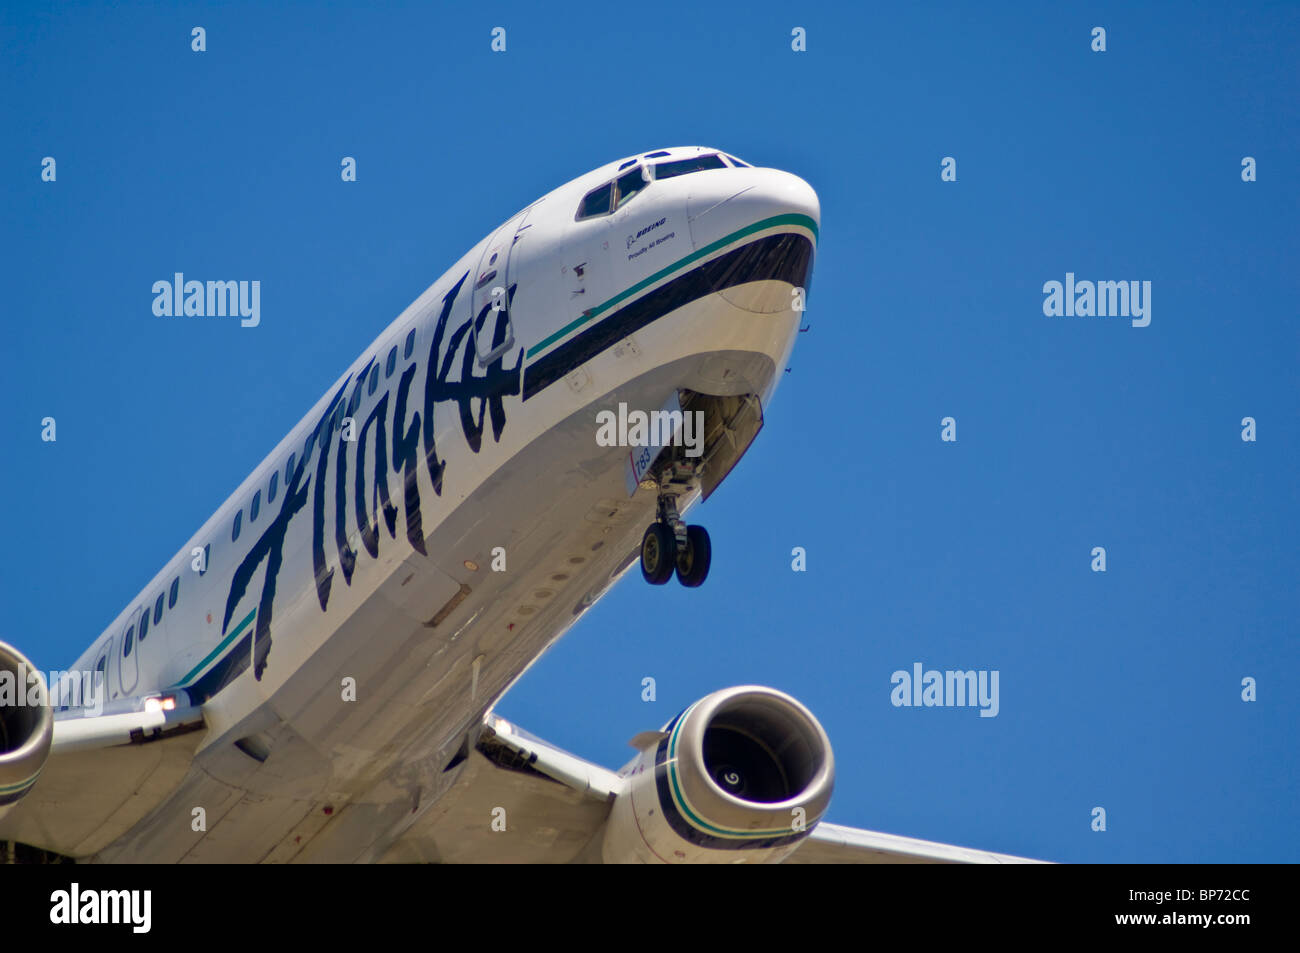 Alaska Airlines Boeing 737 landing at Los Angeles Int'l Airport LAX, Los Angeles, California Stock Photo